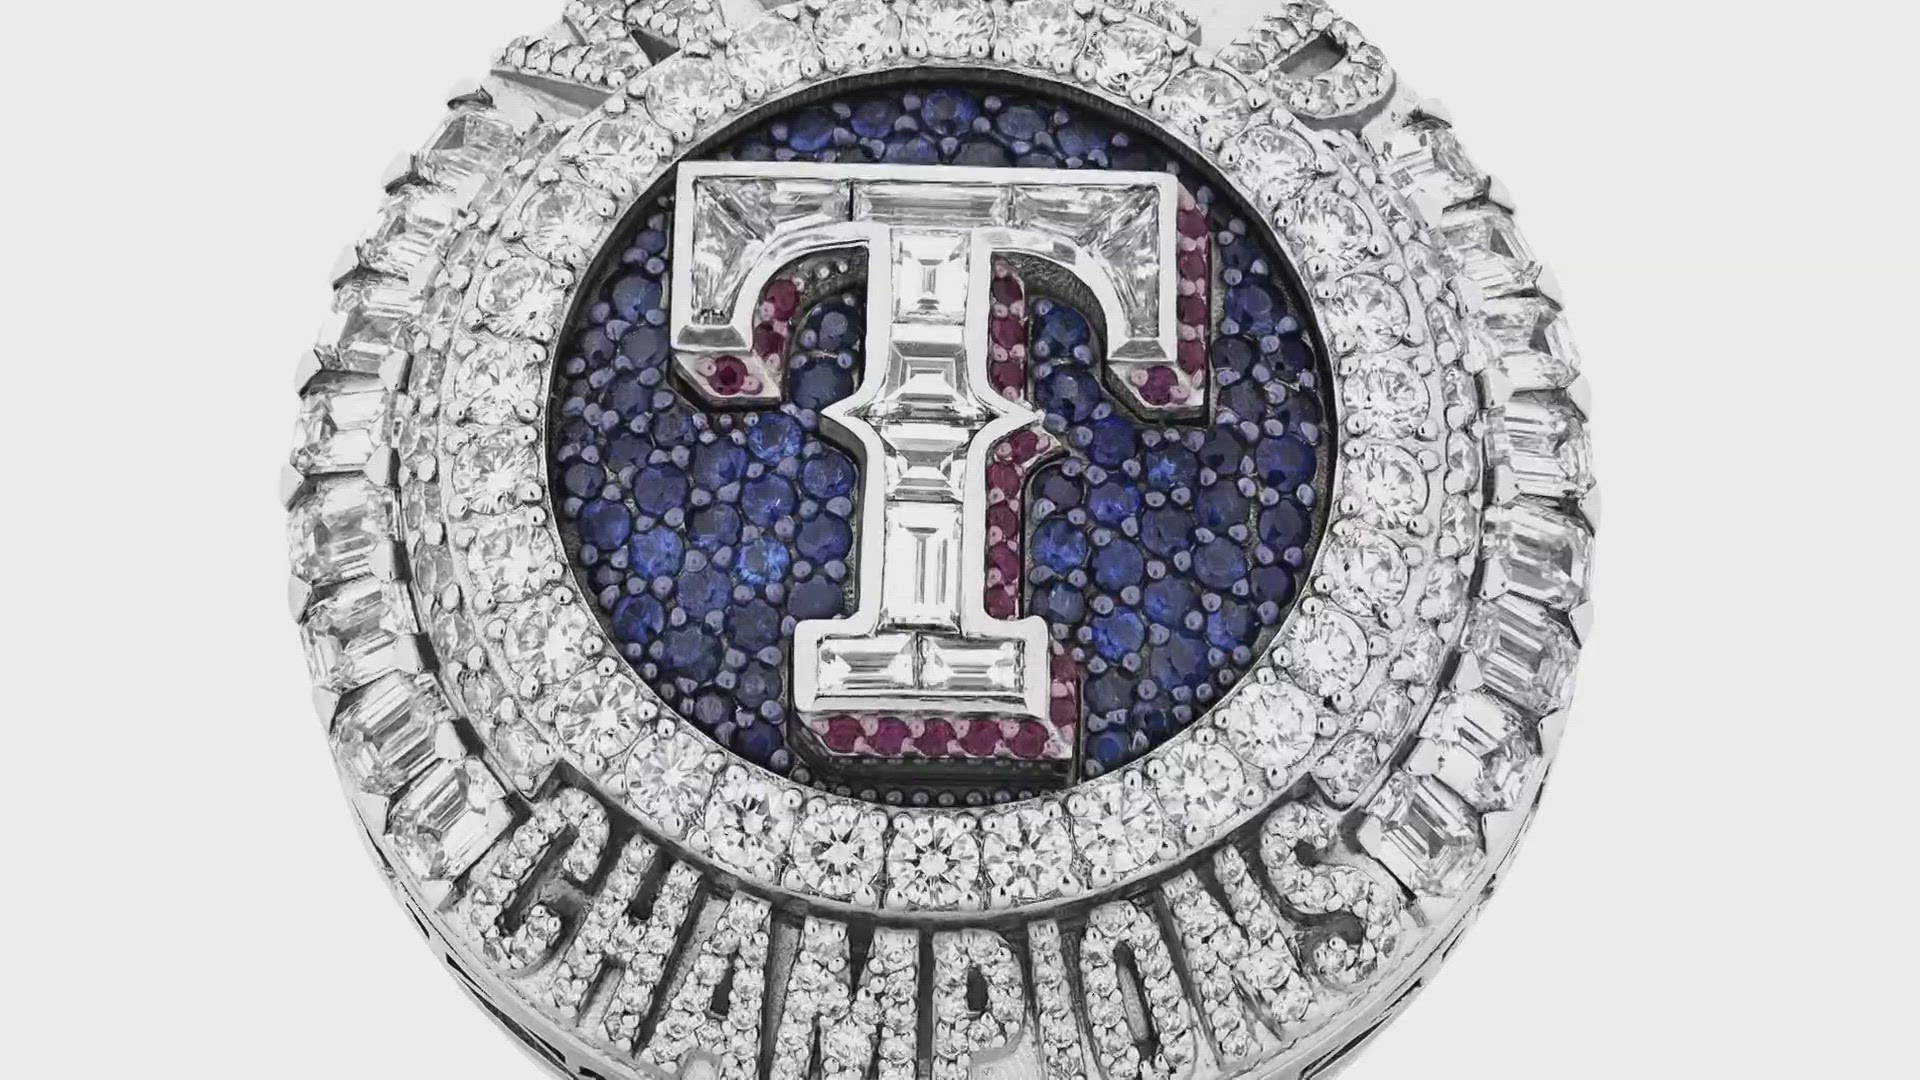 The Rangers players, coaches, and on-field support staff of the 2023 World Series Champions will receive their rings before Saturday's game against the Chicago Cubs.